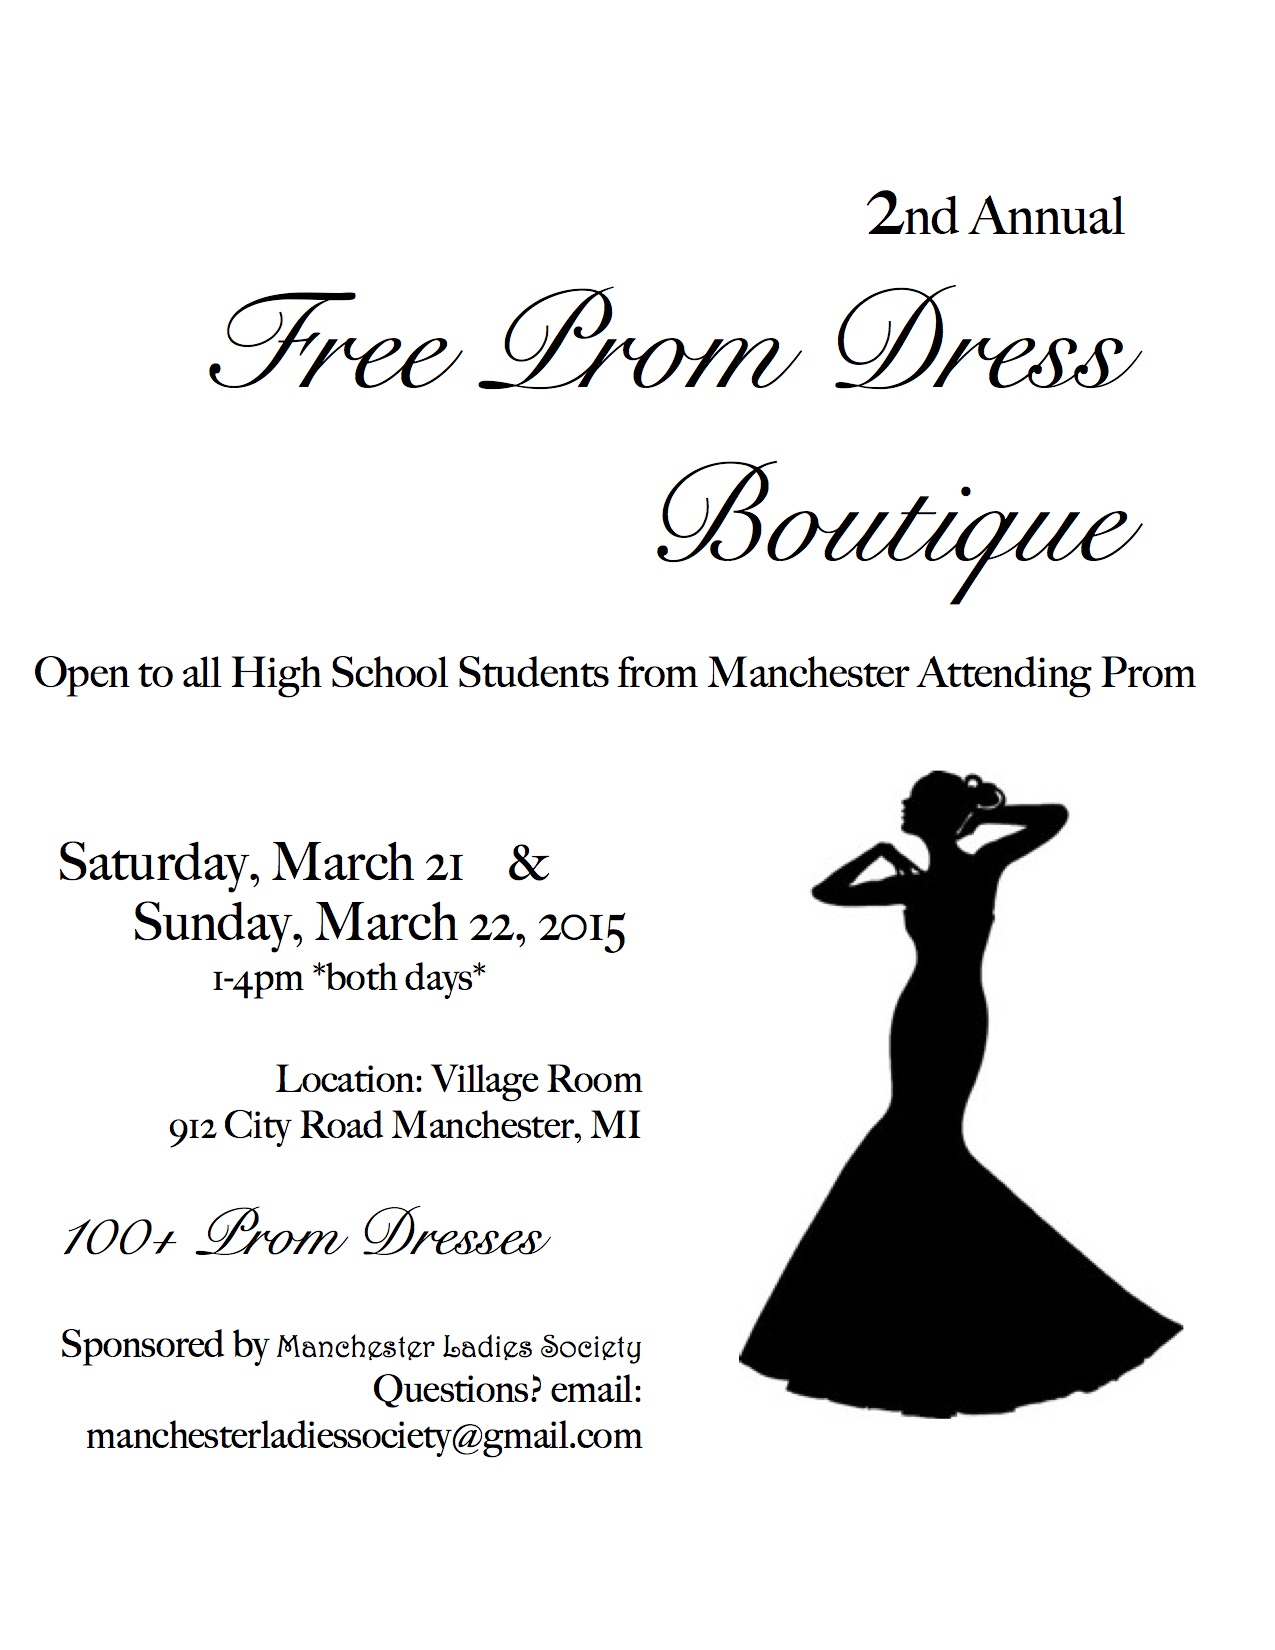 Free Prom Dress Boutique to be Open this Saturday and Sunday | The ...